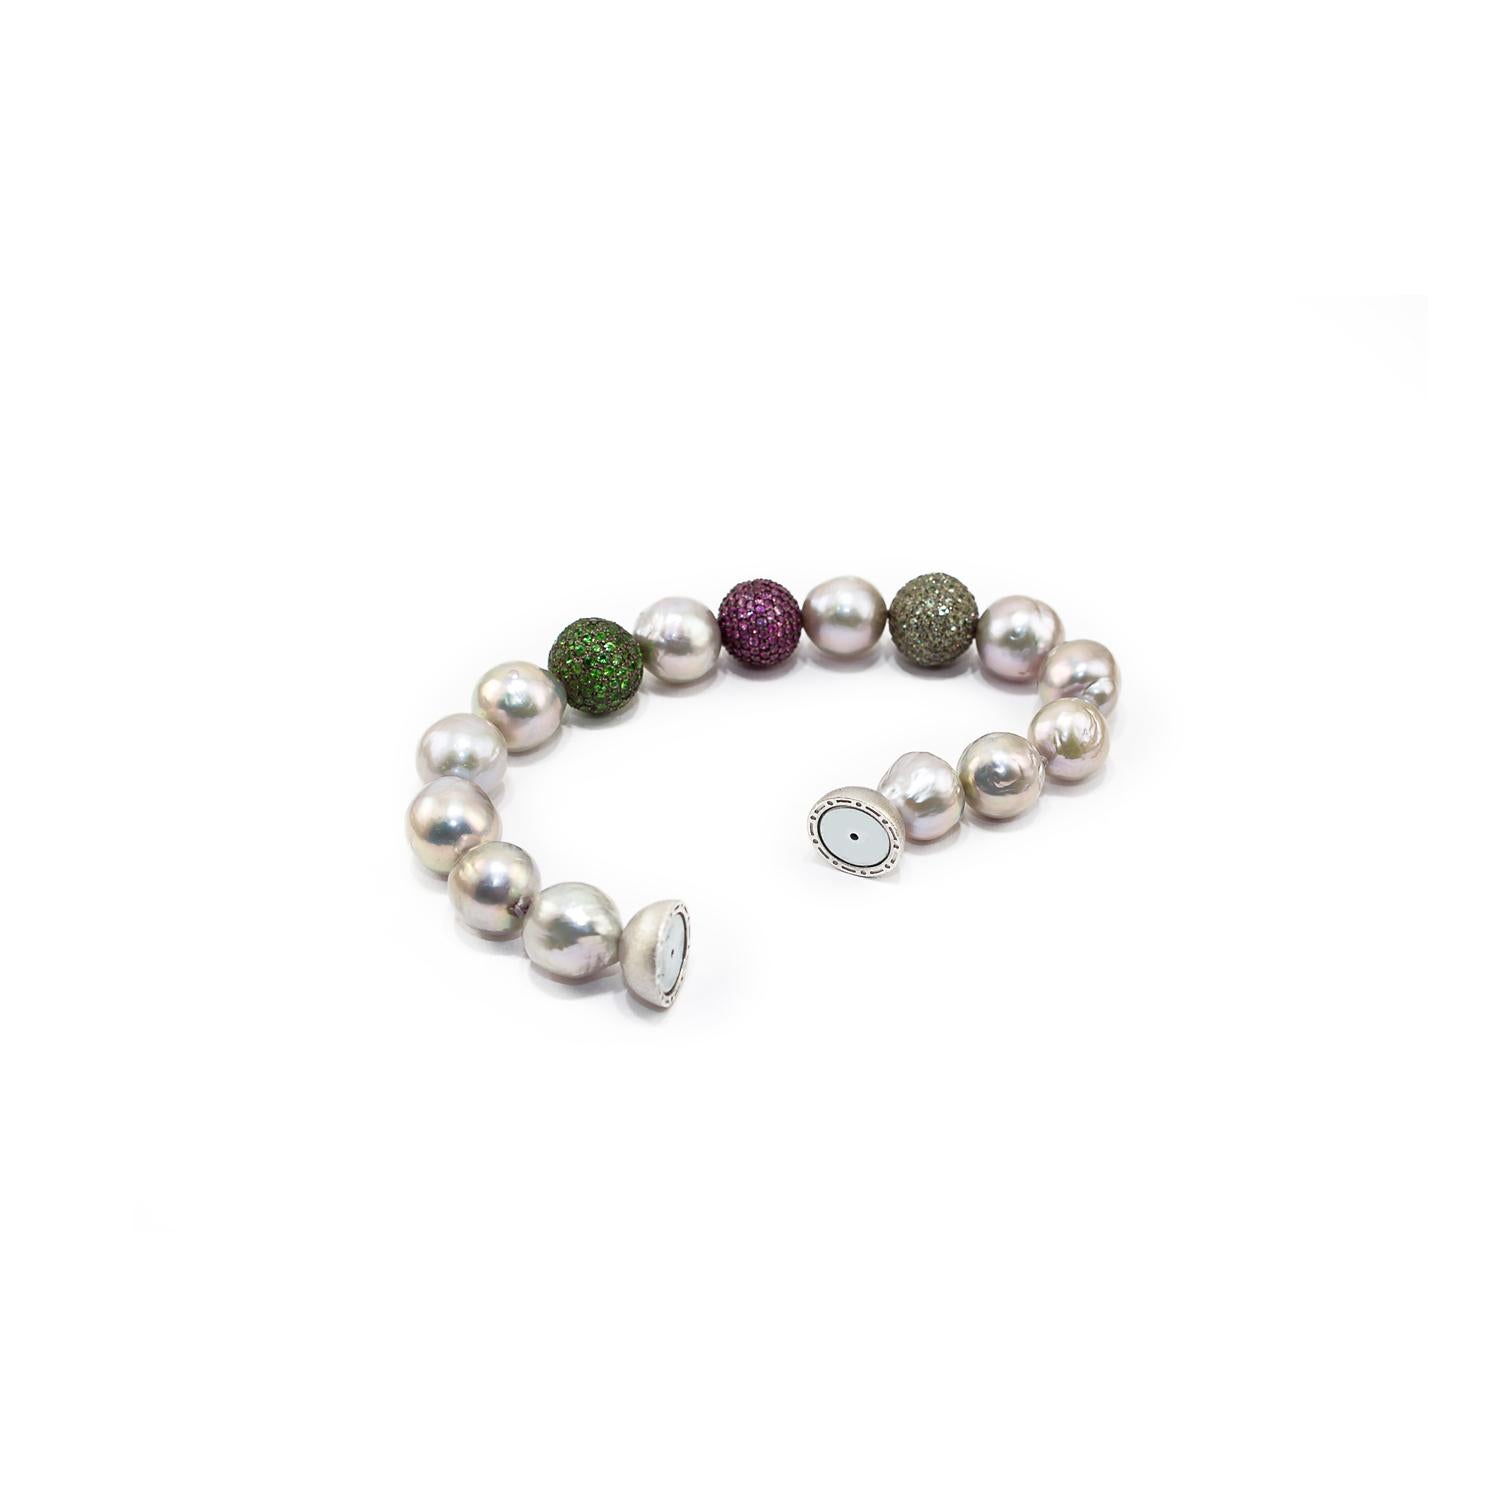 Artisan Green Sapphires, Rubies and Tsavorite Pave, Pearls and Silver Clasp